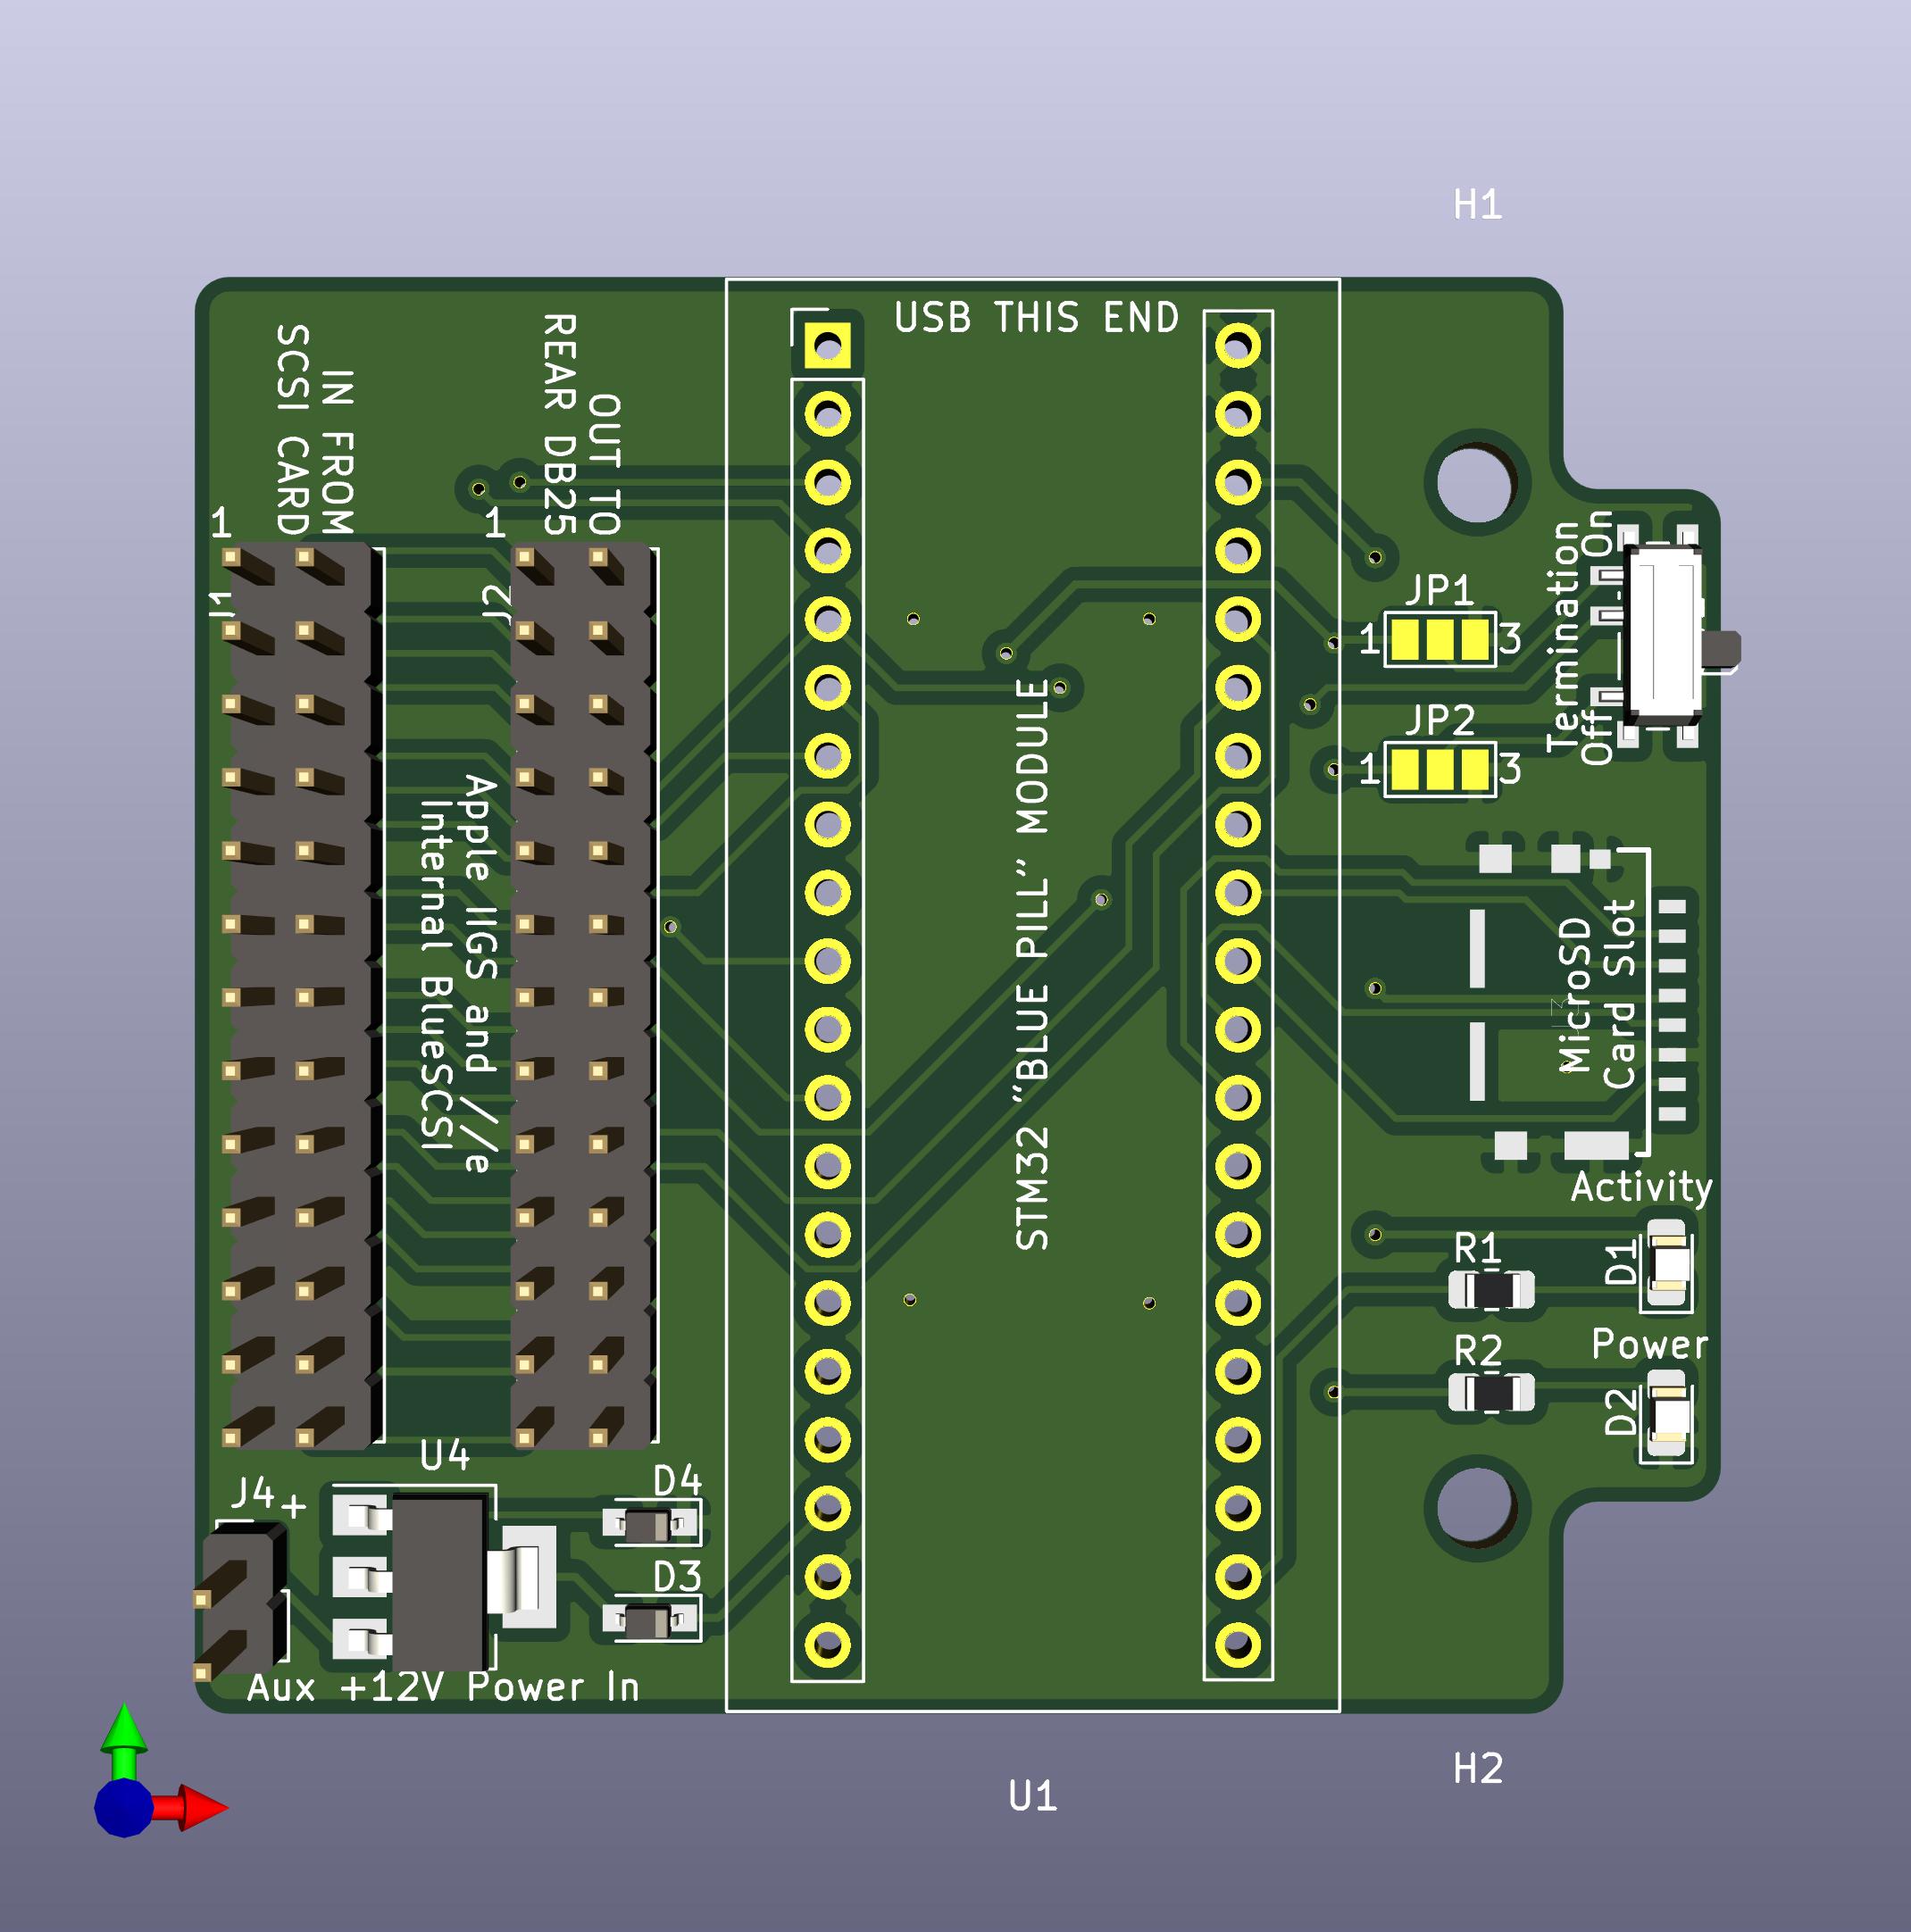 Rendering of front of board v1.2